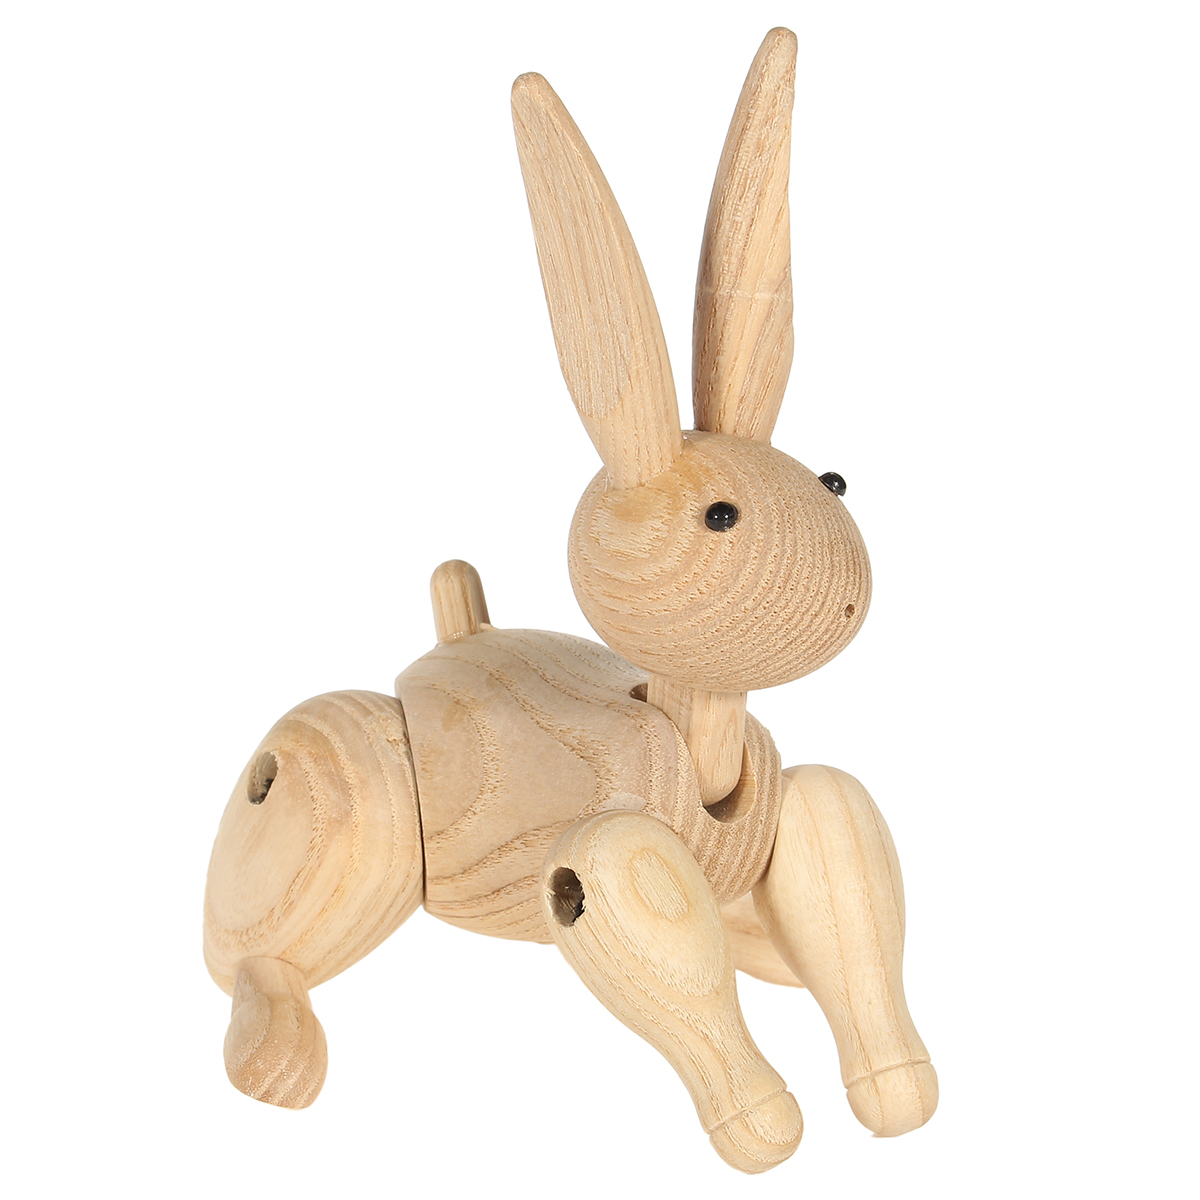 Wood-Carving-Miss-Rabbit-Figurines-Joints-Puppets-Animal-Art-Home-Decoration-Crafts-1241724-7